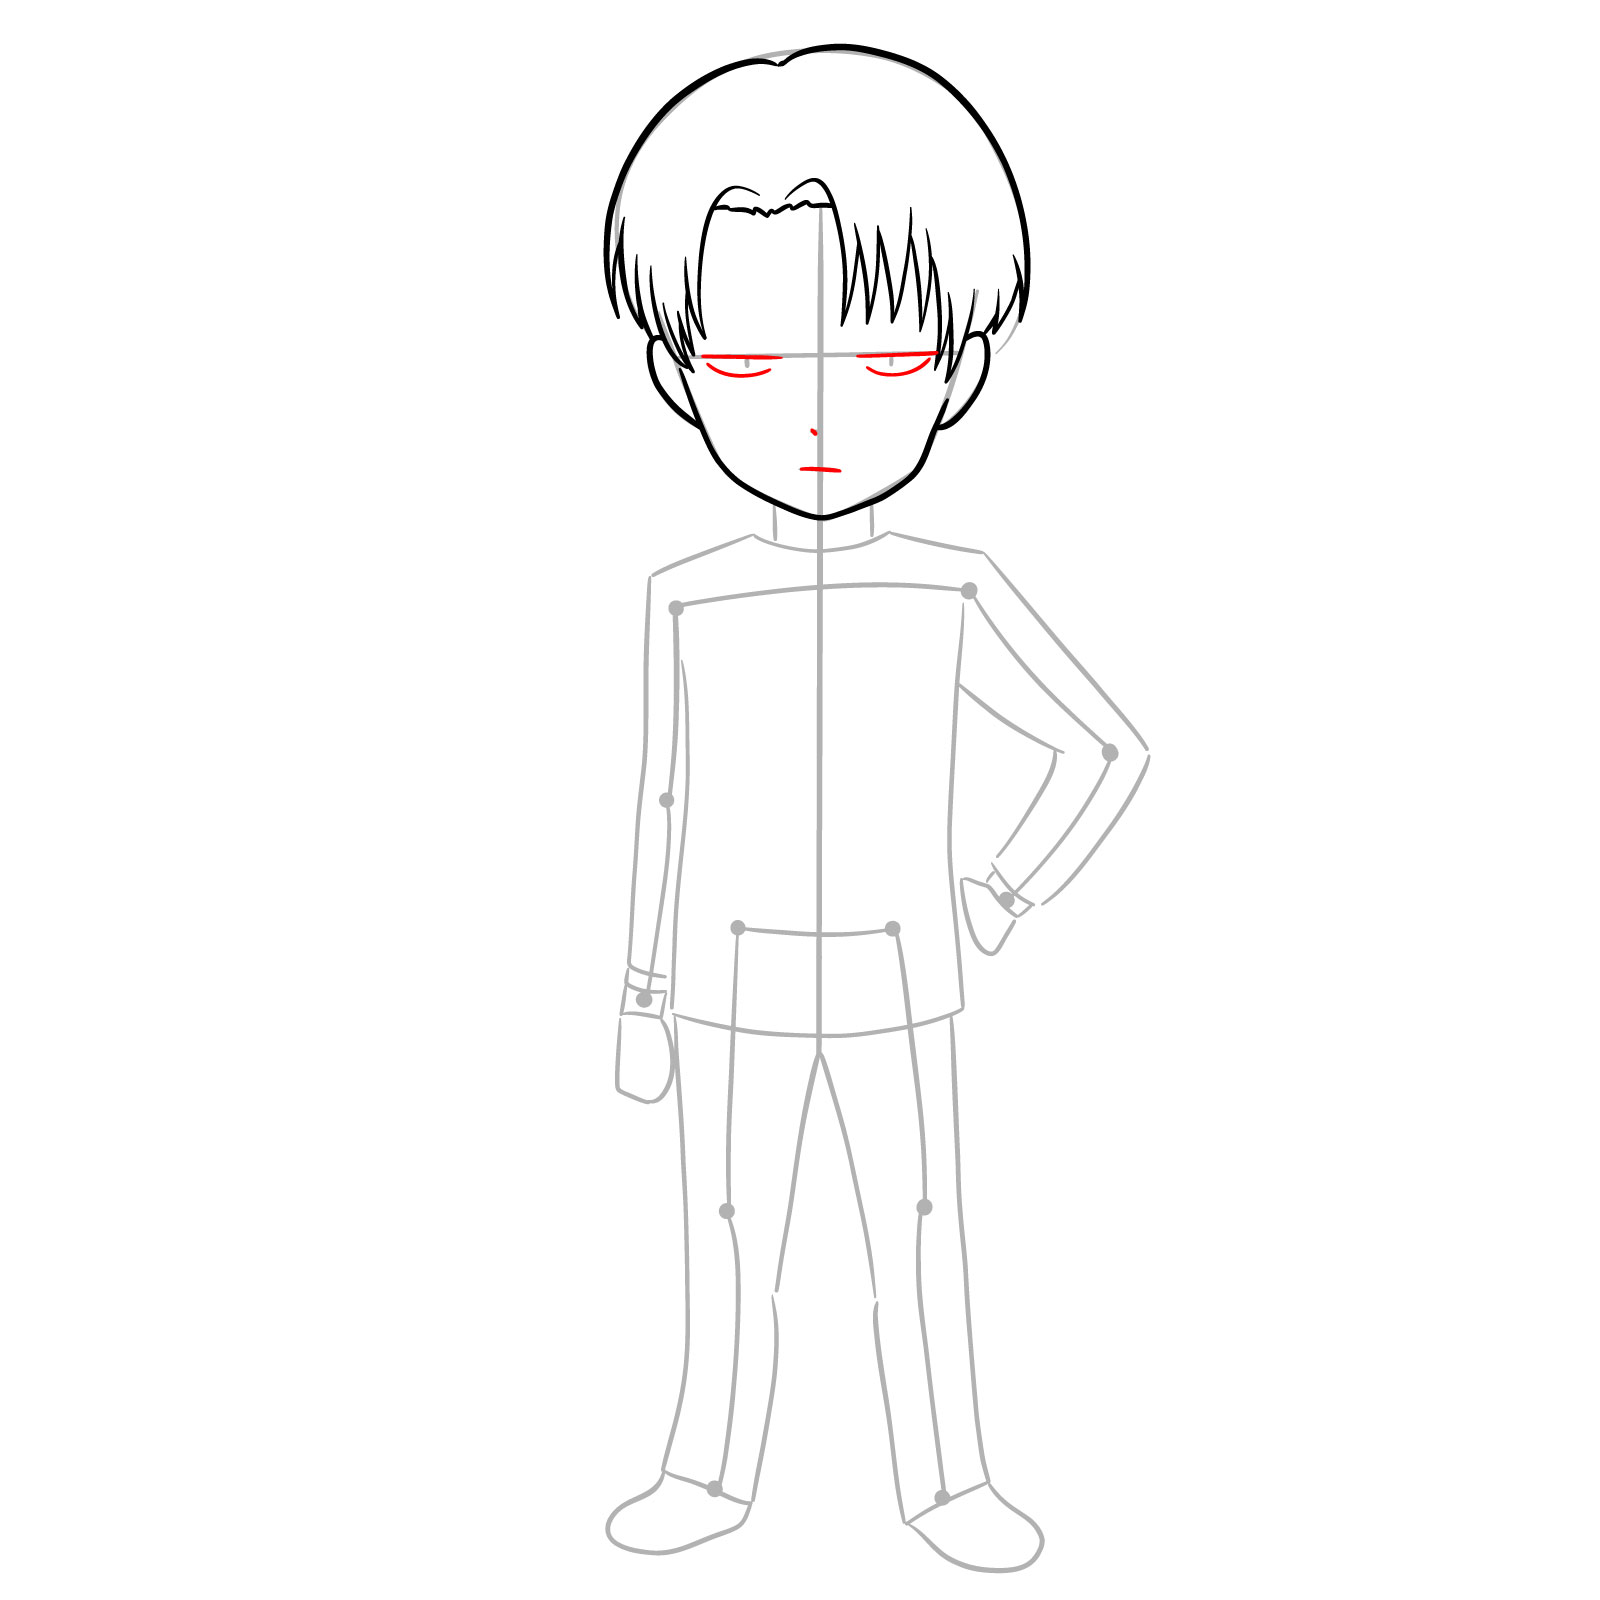 Outlining eyes, nose, and mouth for chibi Levi drawing step - step 07